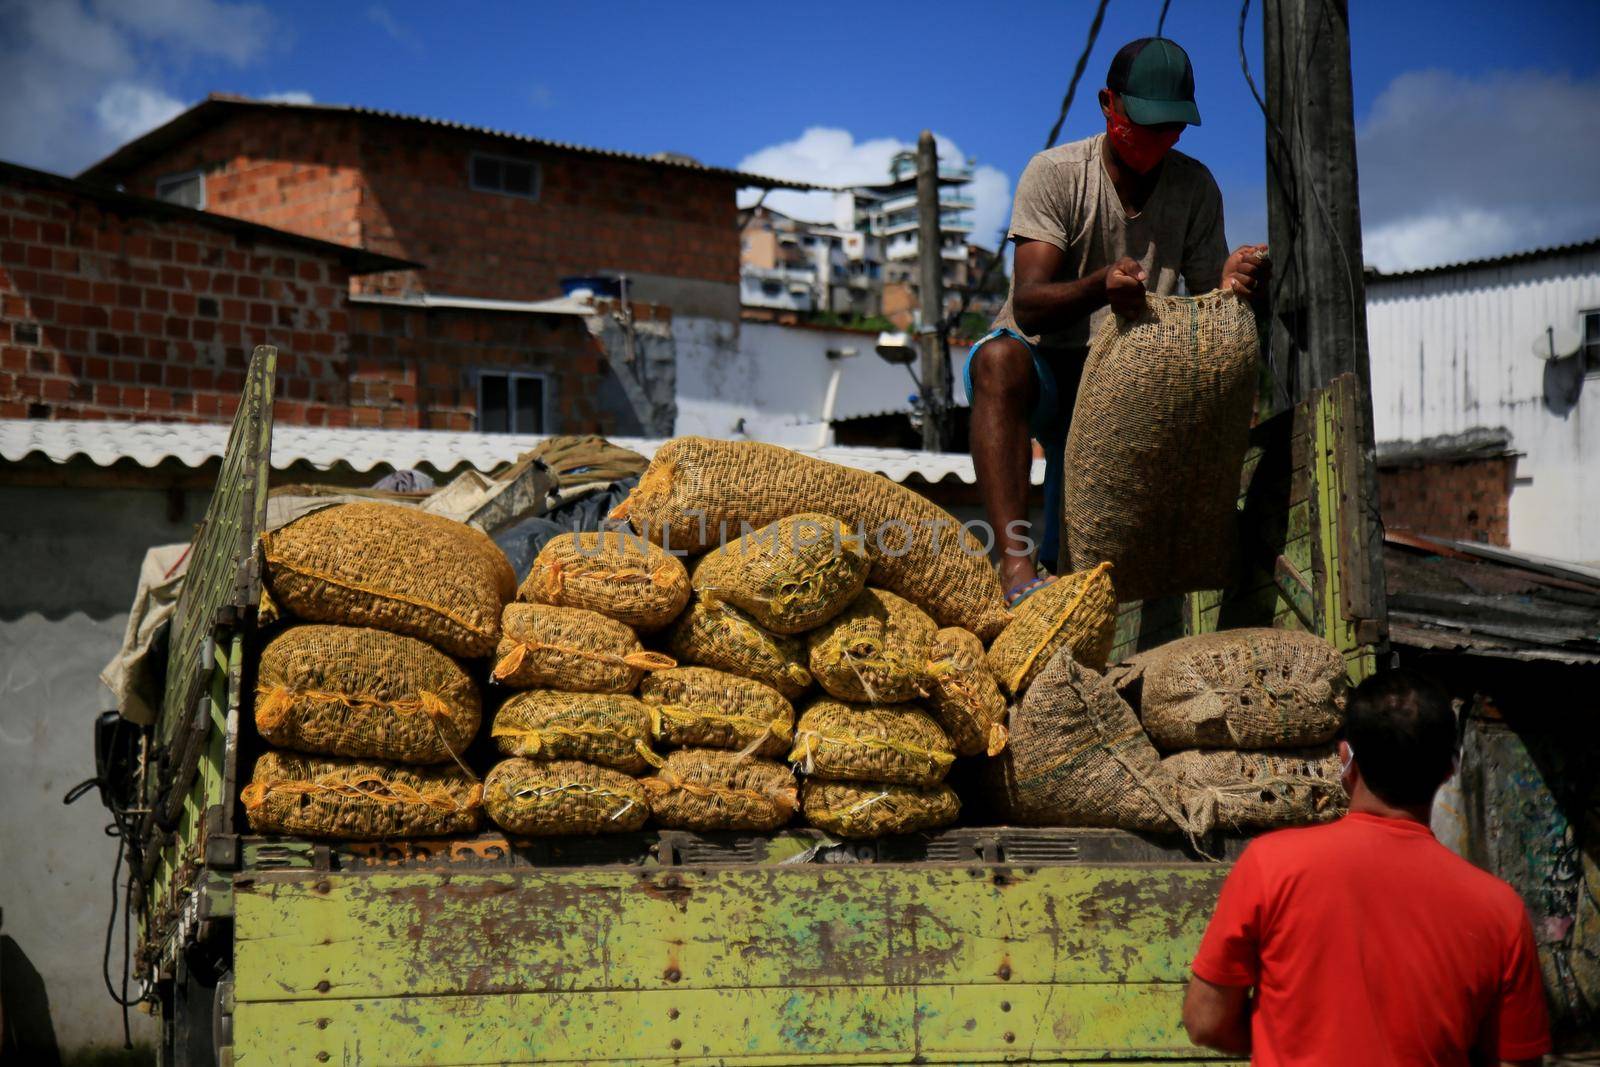 salvador, bahia, brazil - june 28, 2021:People are seen unloading bags of peanuts from a truck at the Sao Joaquim fair in the city of Salvador.

